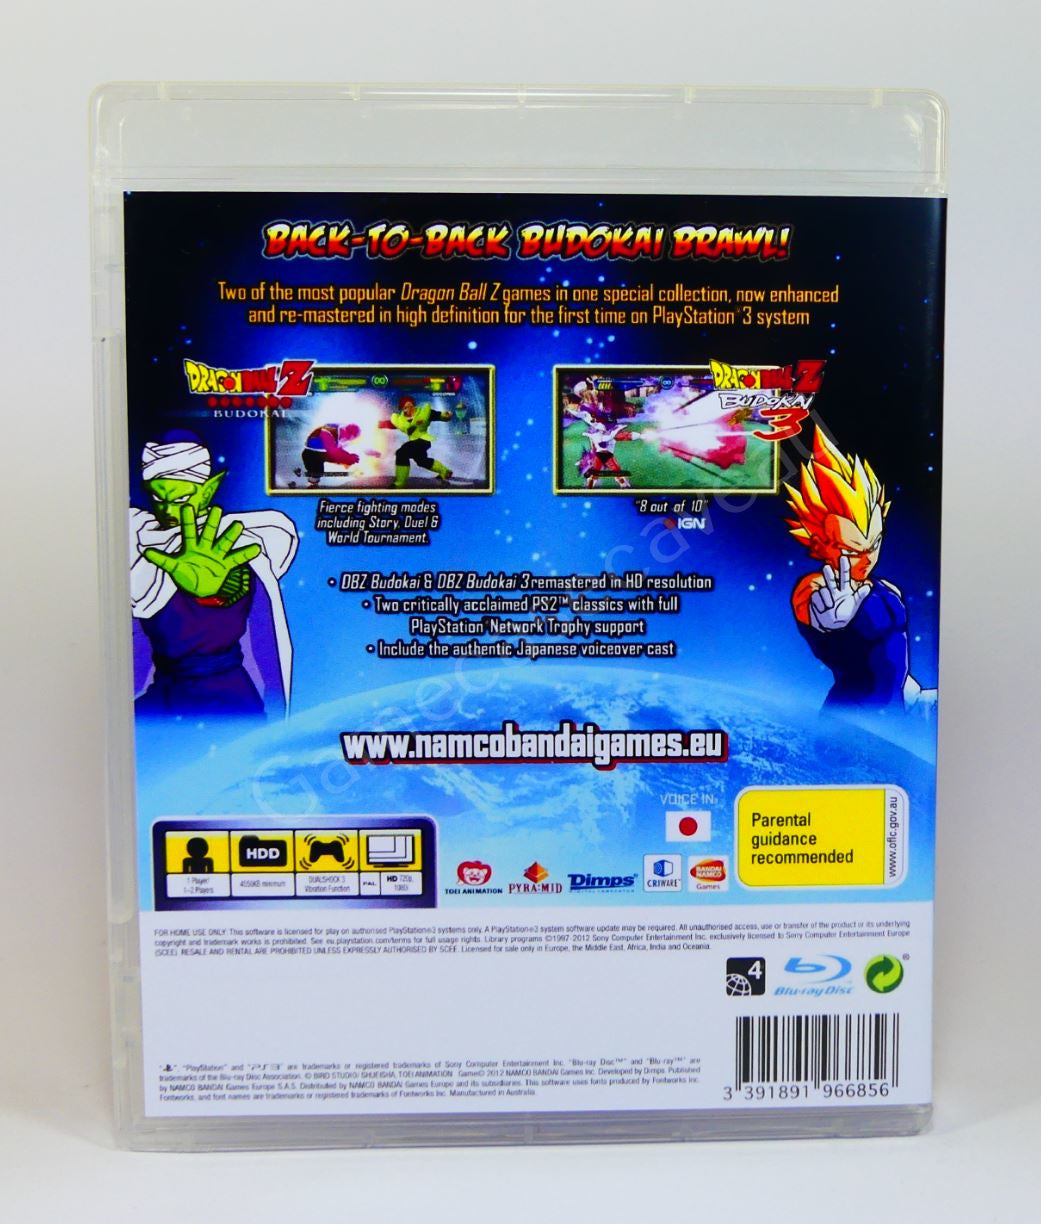 Dragon Ball Z Budoken HD Collection - PS3 Replacement Case